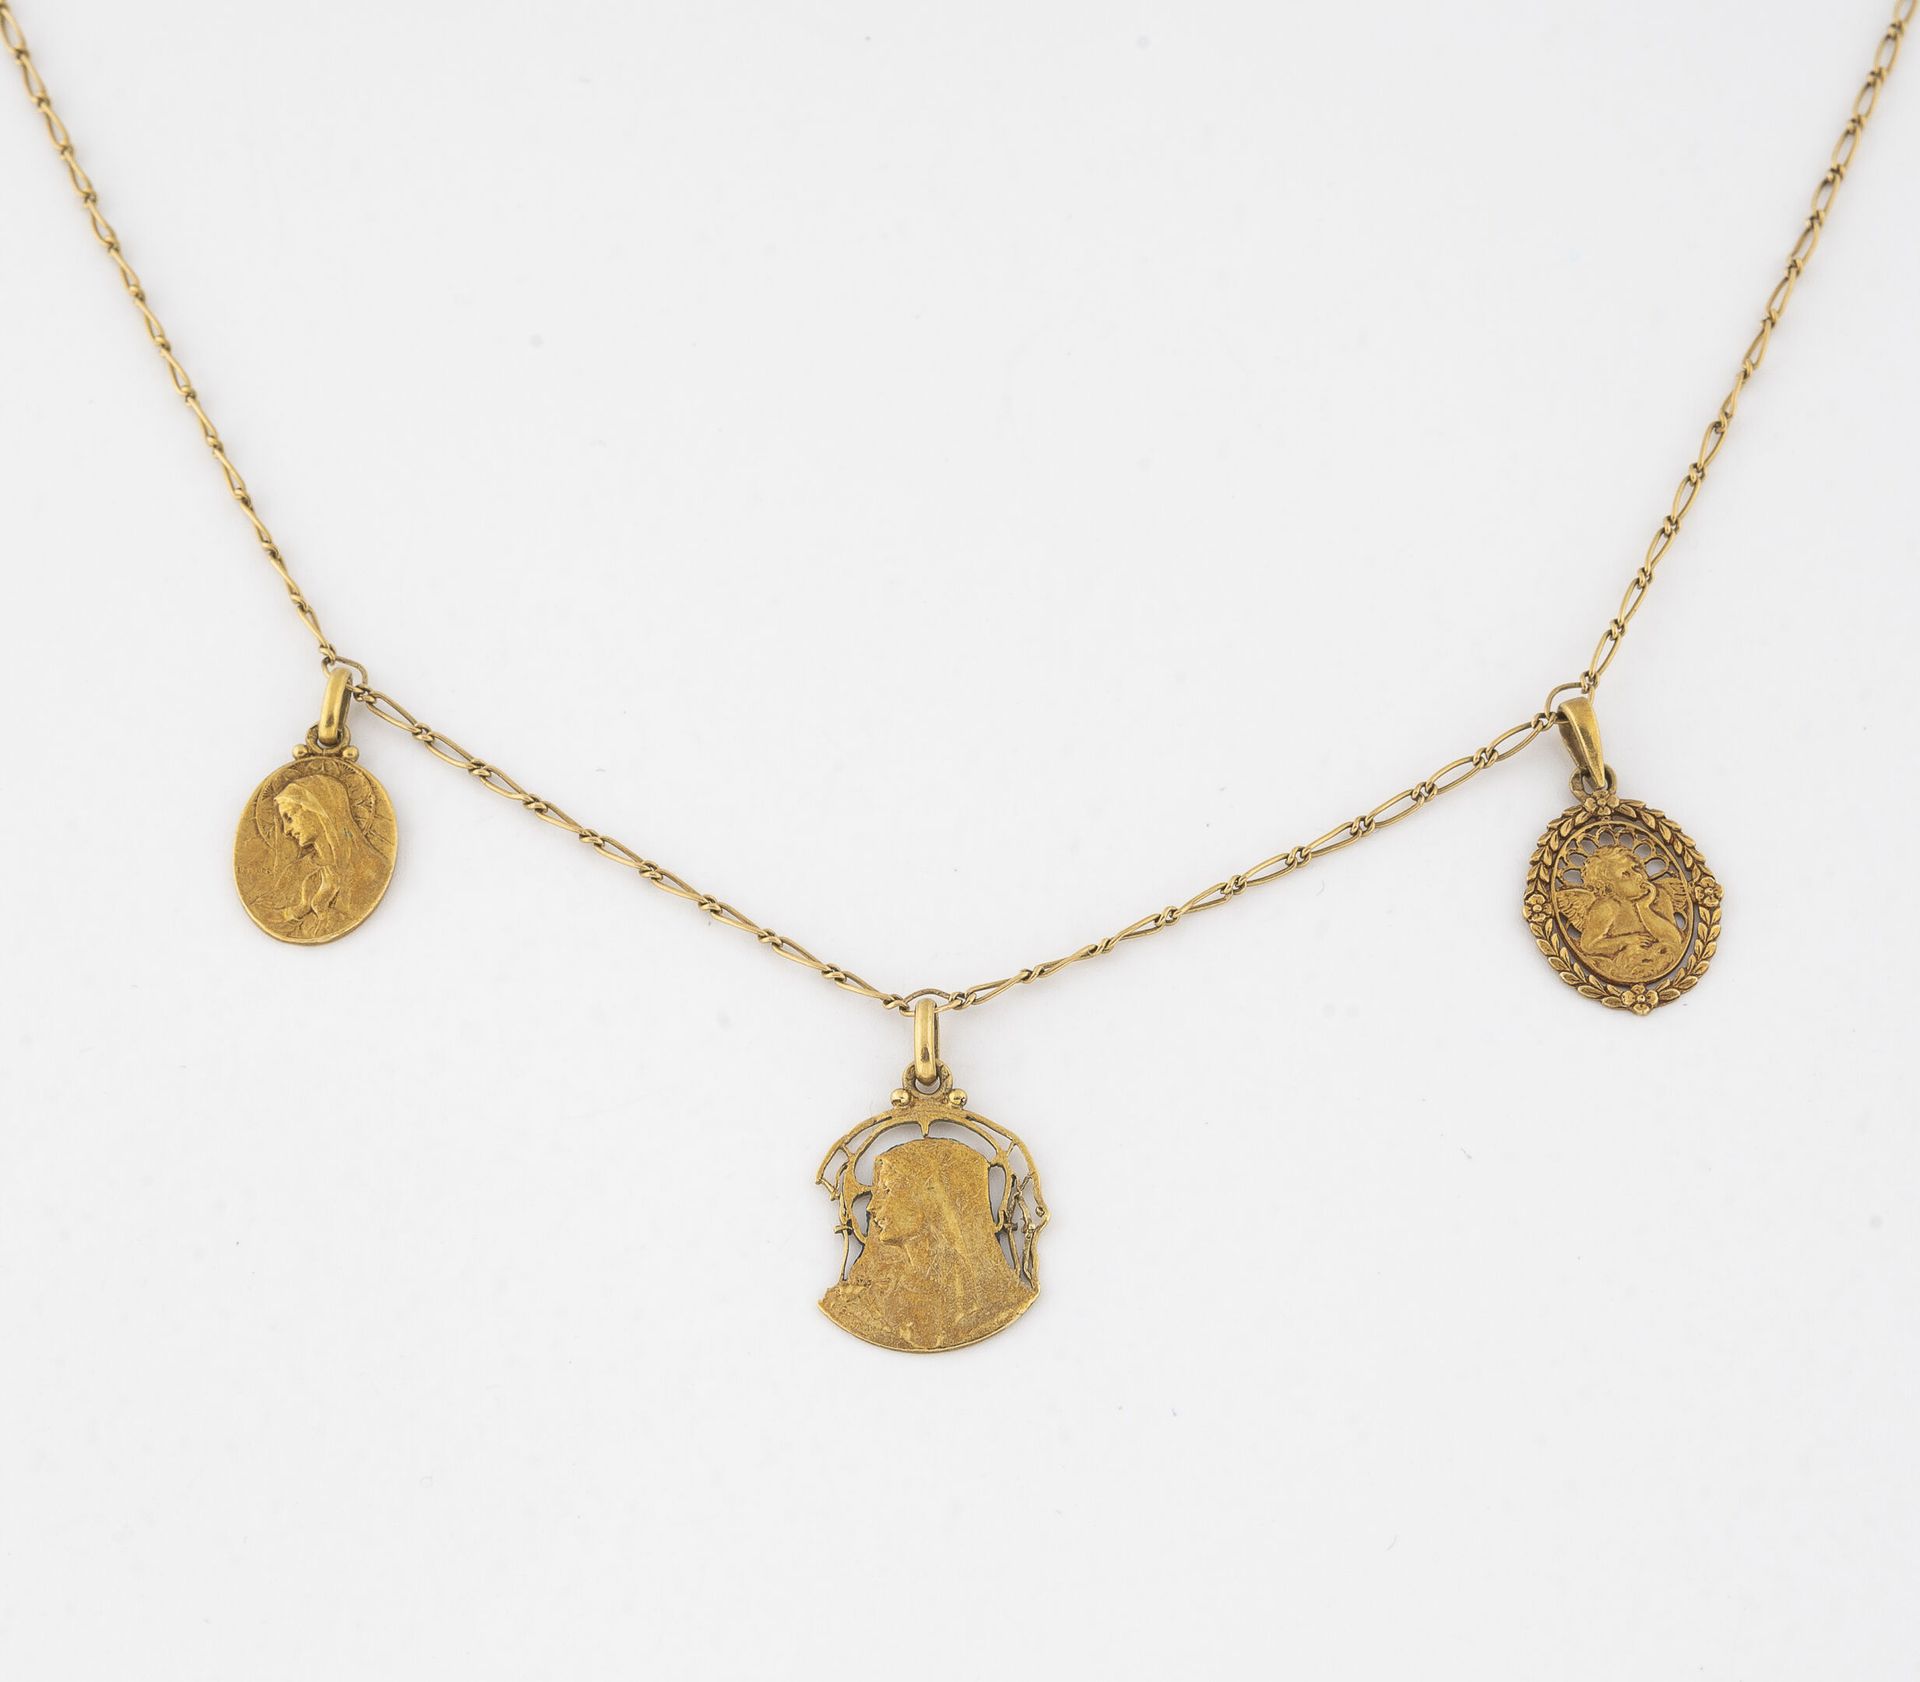 Null Necklace in yellow gold (750) with fancy mesh, holding three religious meda&hellip;